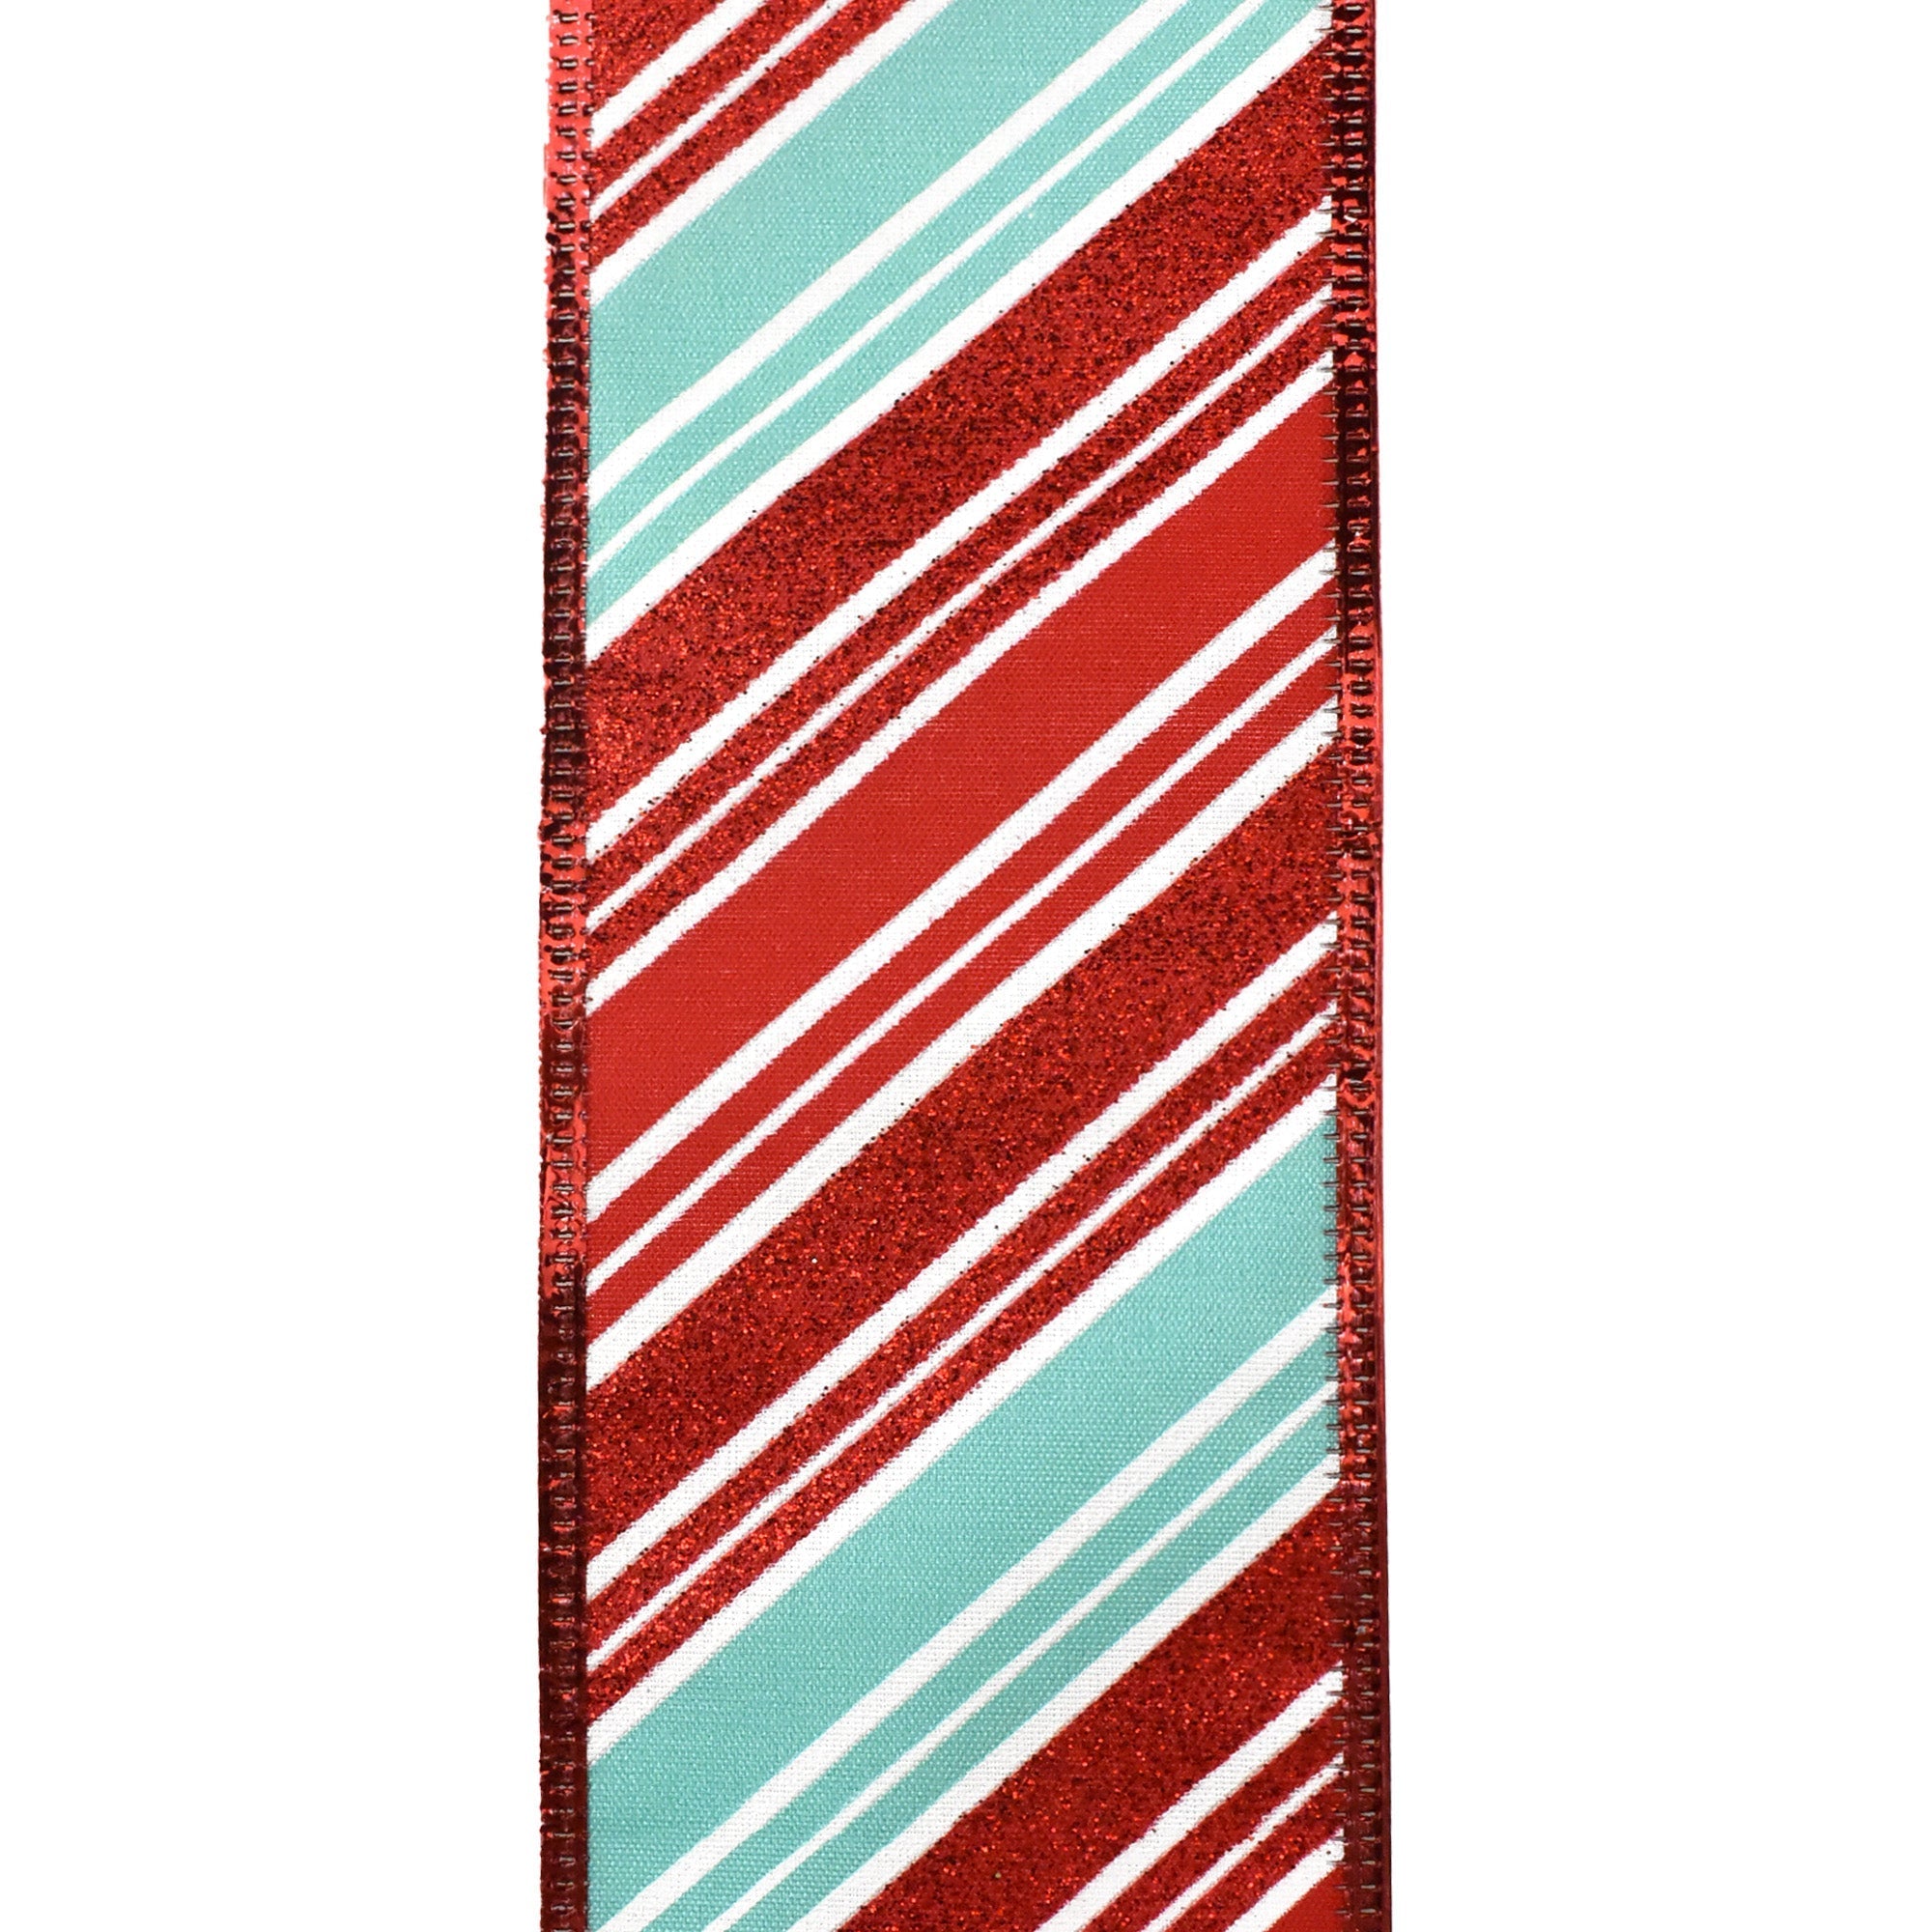 Christmas Glittered Stripes Wired Ribbon, 2-1/2-Inch, 10-Yard - Red/Lime/Turquoise